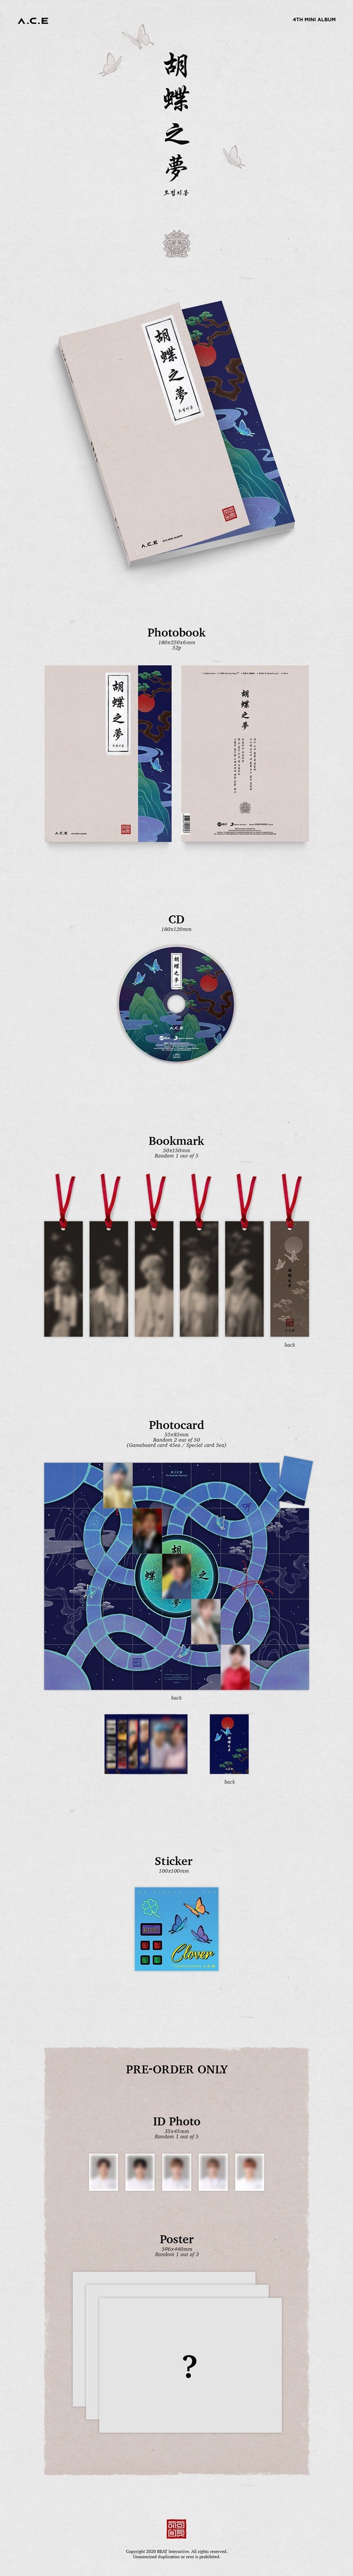 1 CD
1 Photo Book (52 pages)
1 Bookmark
2 Photo Cards
1 Sticker